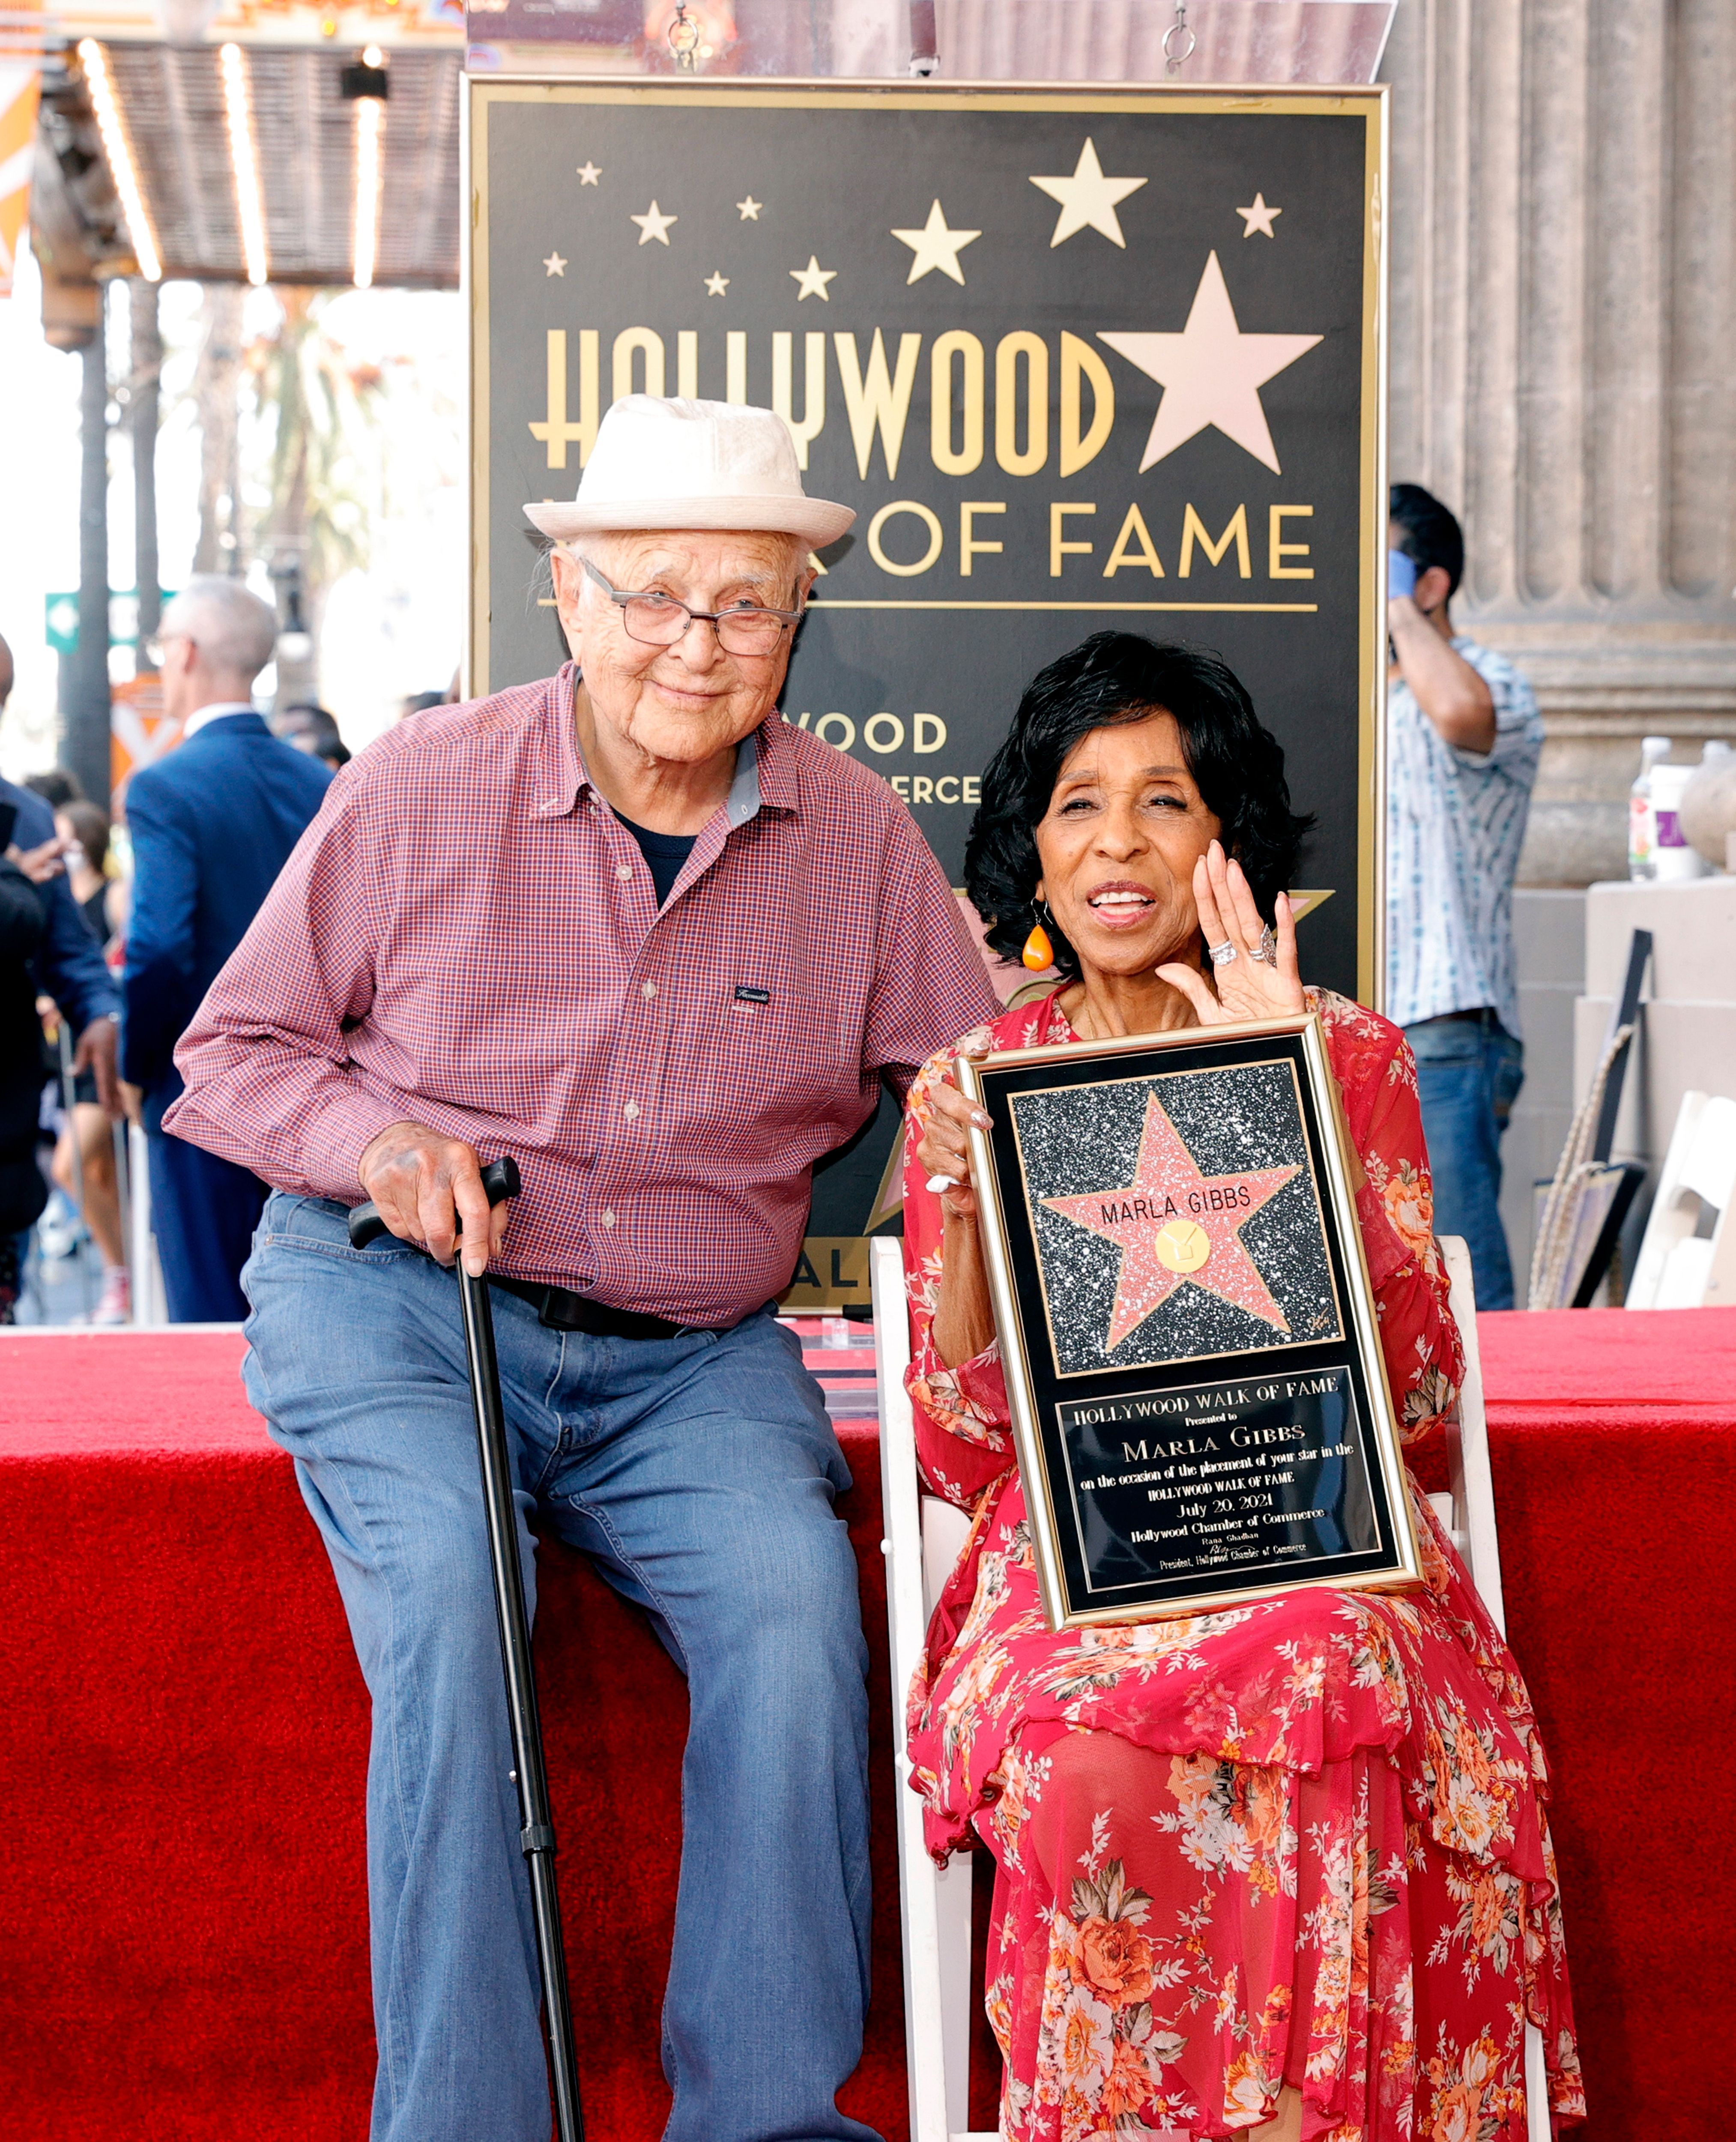 (L-R) Norman Lear and Marla Gibbs attend the Hollywood Walk of Fame Star Ceremony honoring Marla Gibbs on July 20, 2021, in Hollywood, Calif.